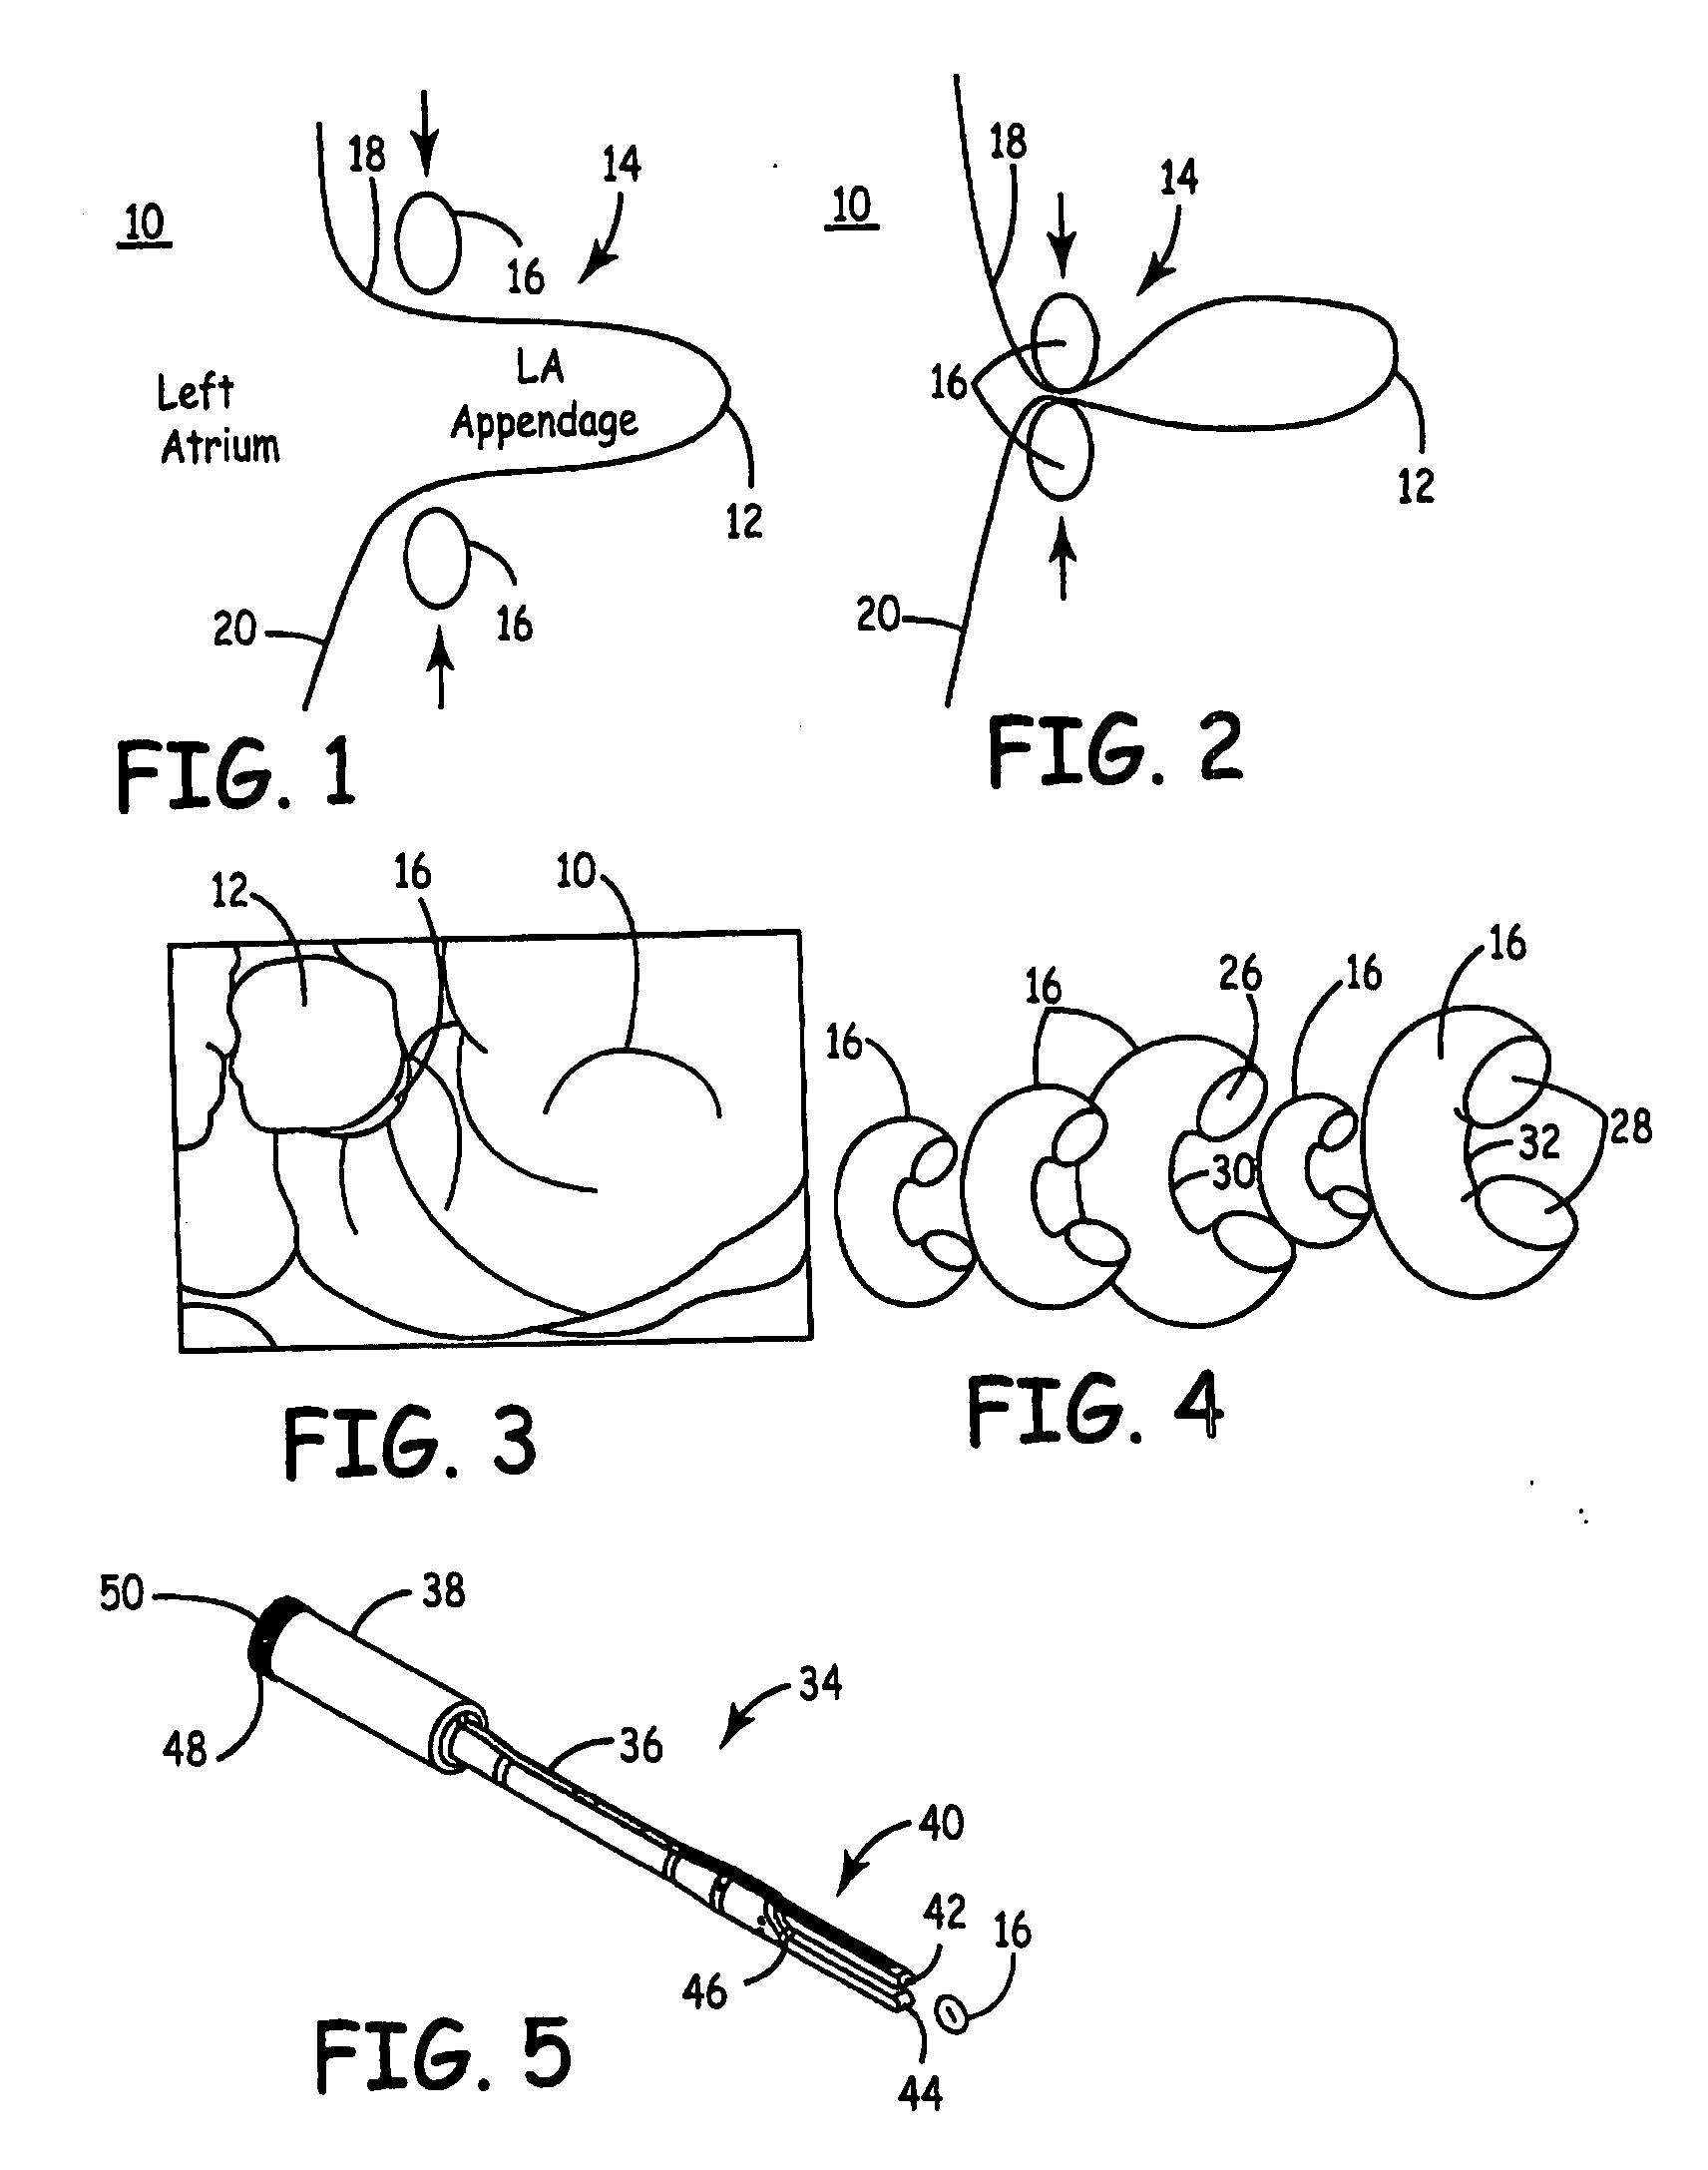 Methods and devices for occlusion of an atrial appendage